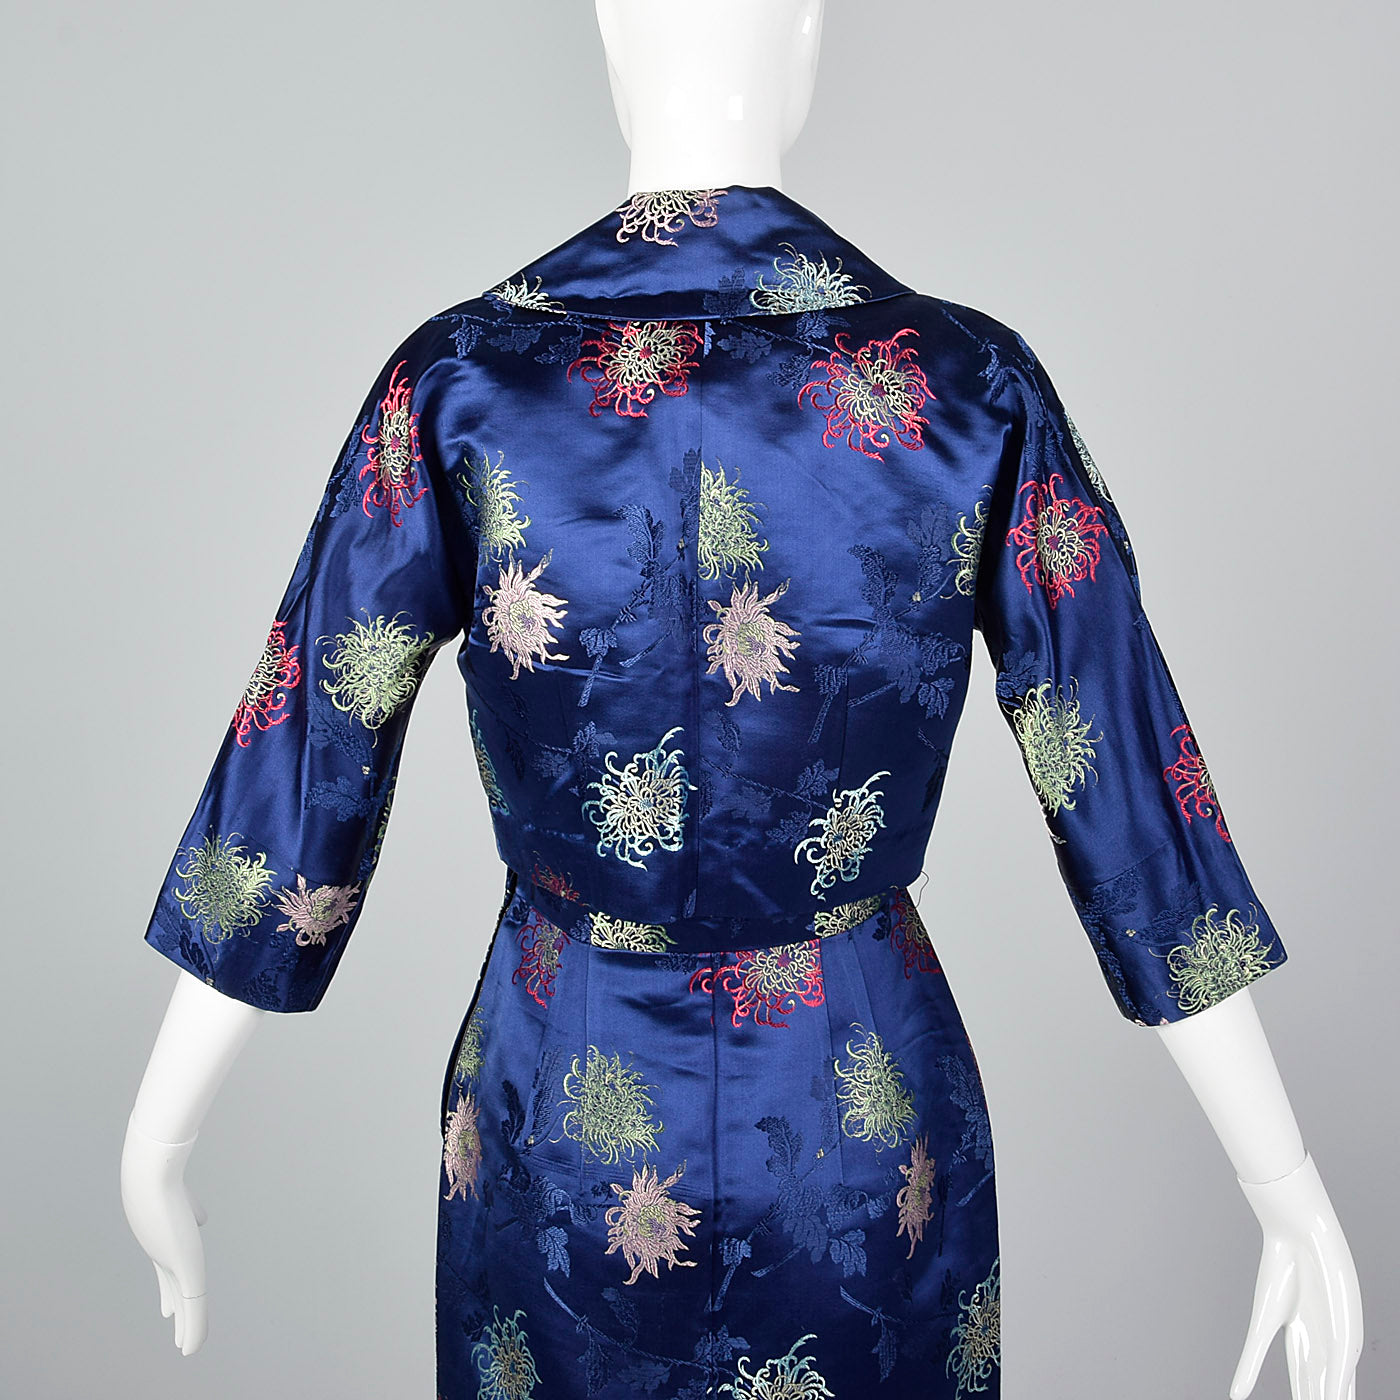 1960s Blue Brocade Dress with Matching Jacket